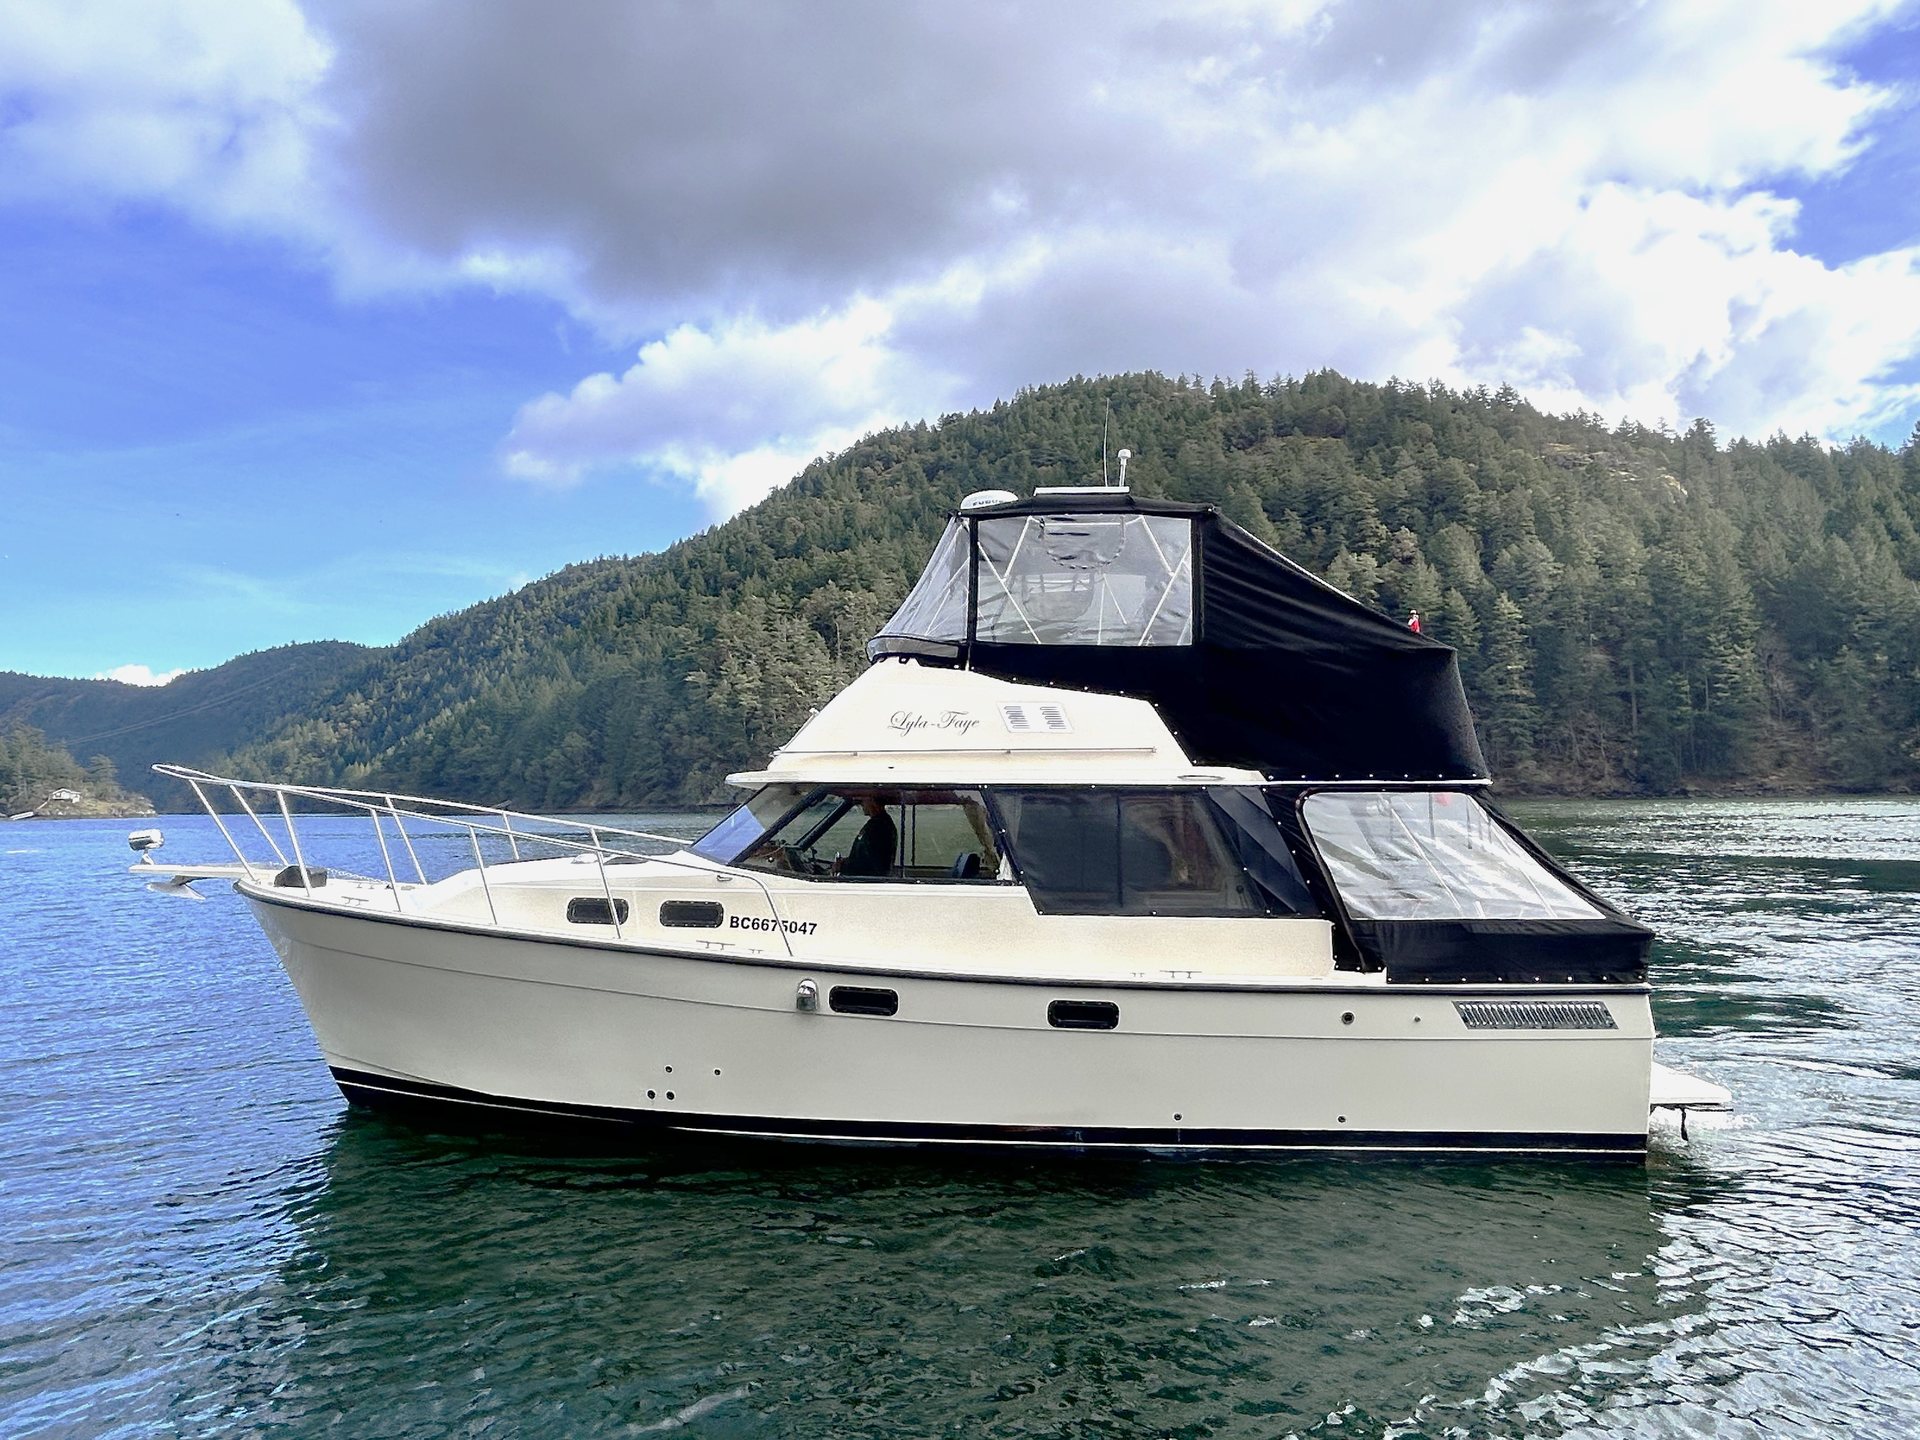 360 VR Virtual Tours of the 1982 Bayliner 3270